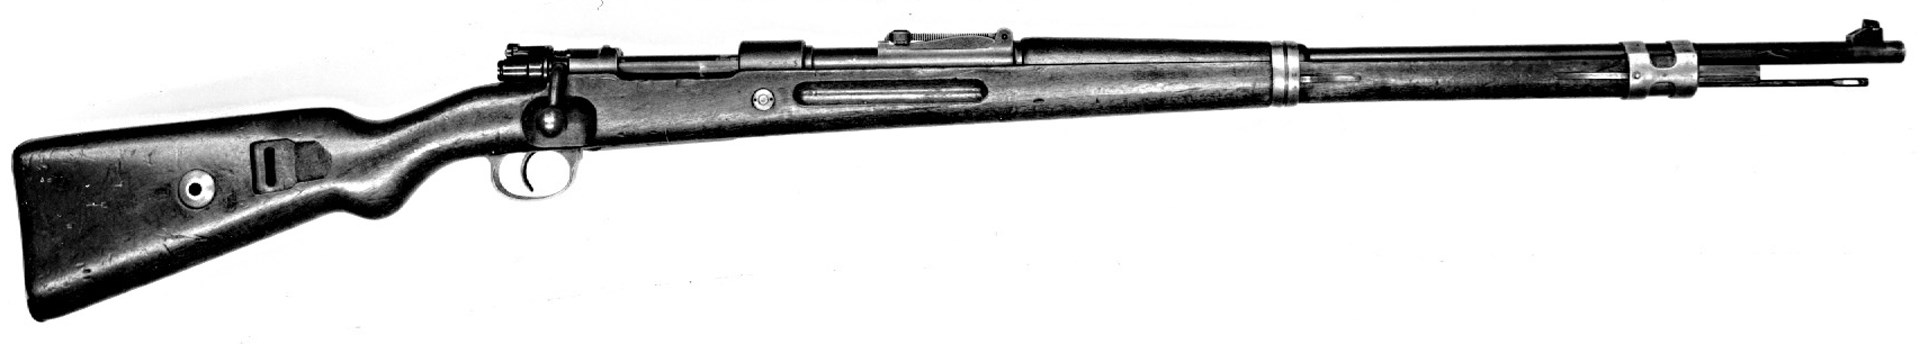 Post-war german mauser bolt-action rifle right-side view black and white vintage